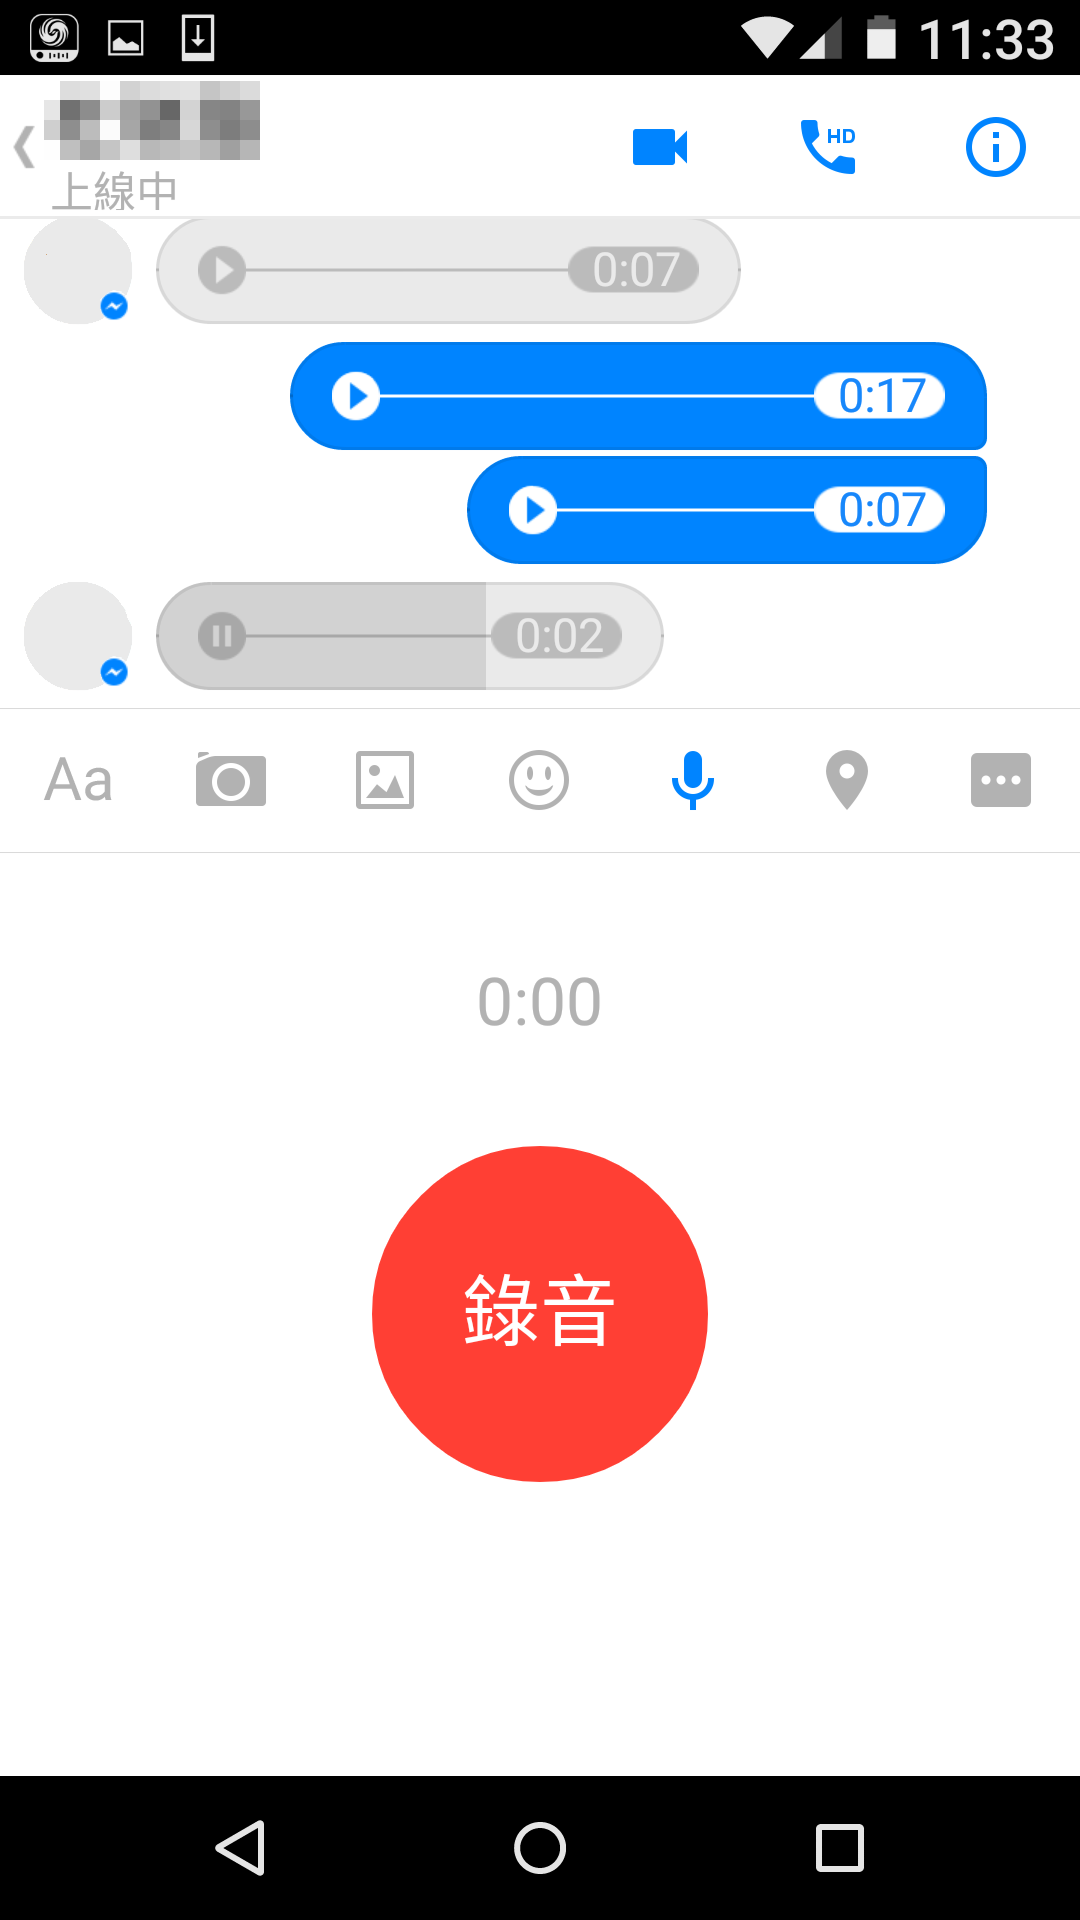 Using voice messaging to practise Chinese speaking and listening